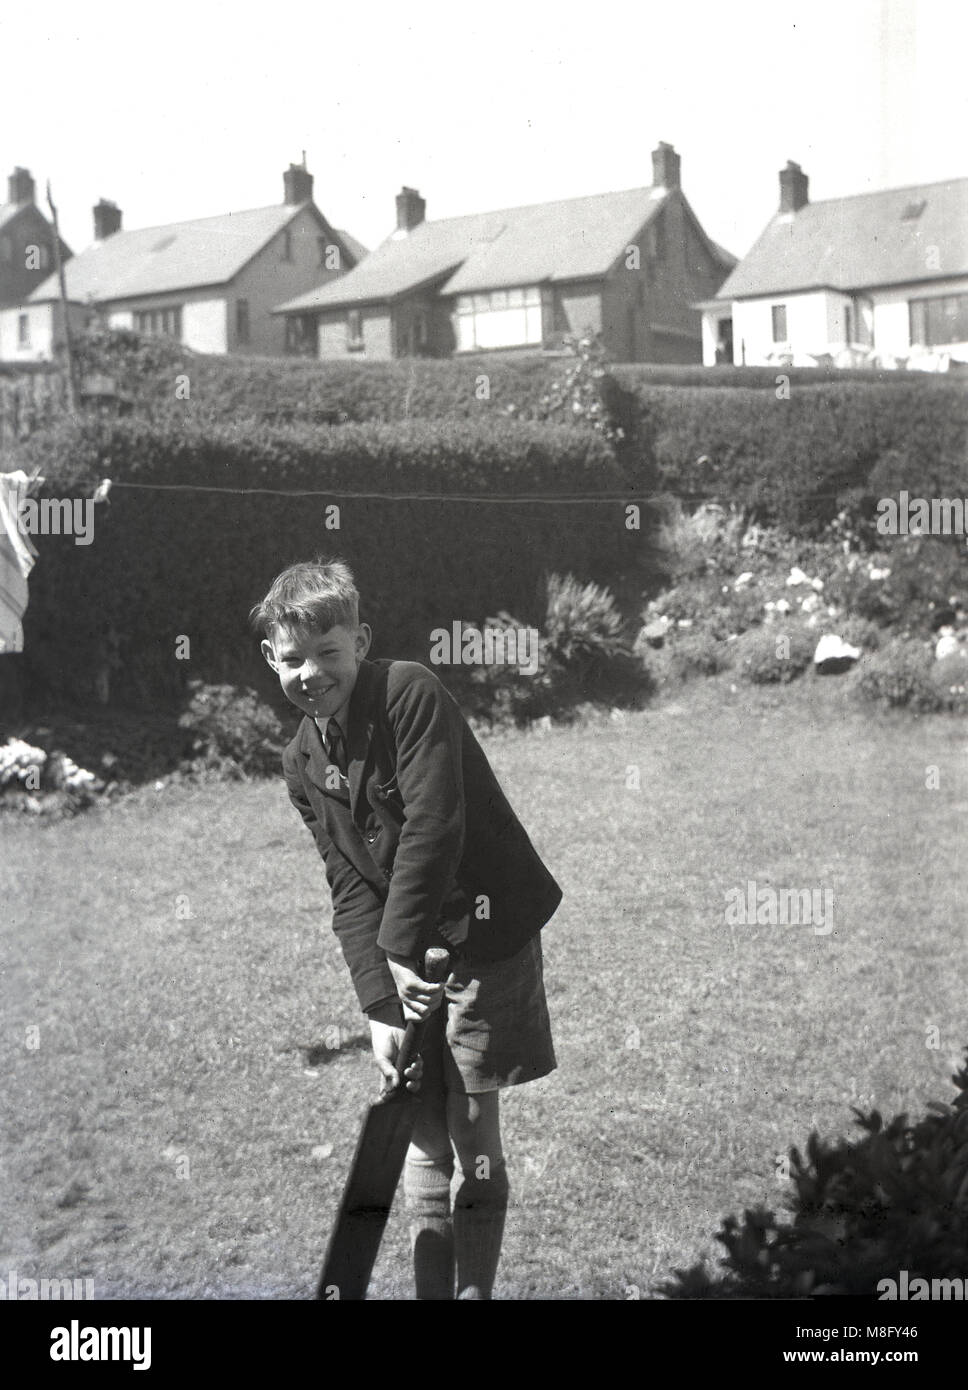 1950, historical, summertime and outside in a suburban back garden, a schoolboy in jacket and shorts holding an old cricket bat, England, UK. Stock Photo